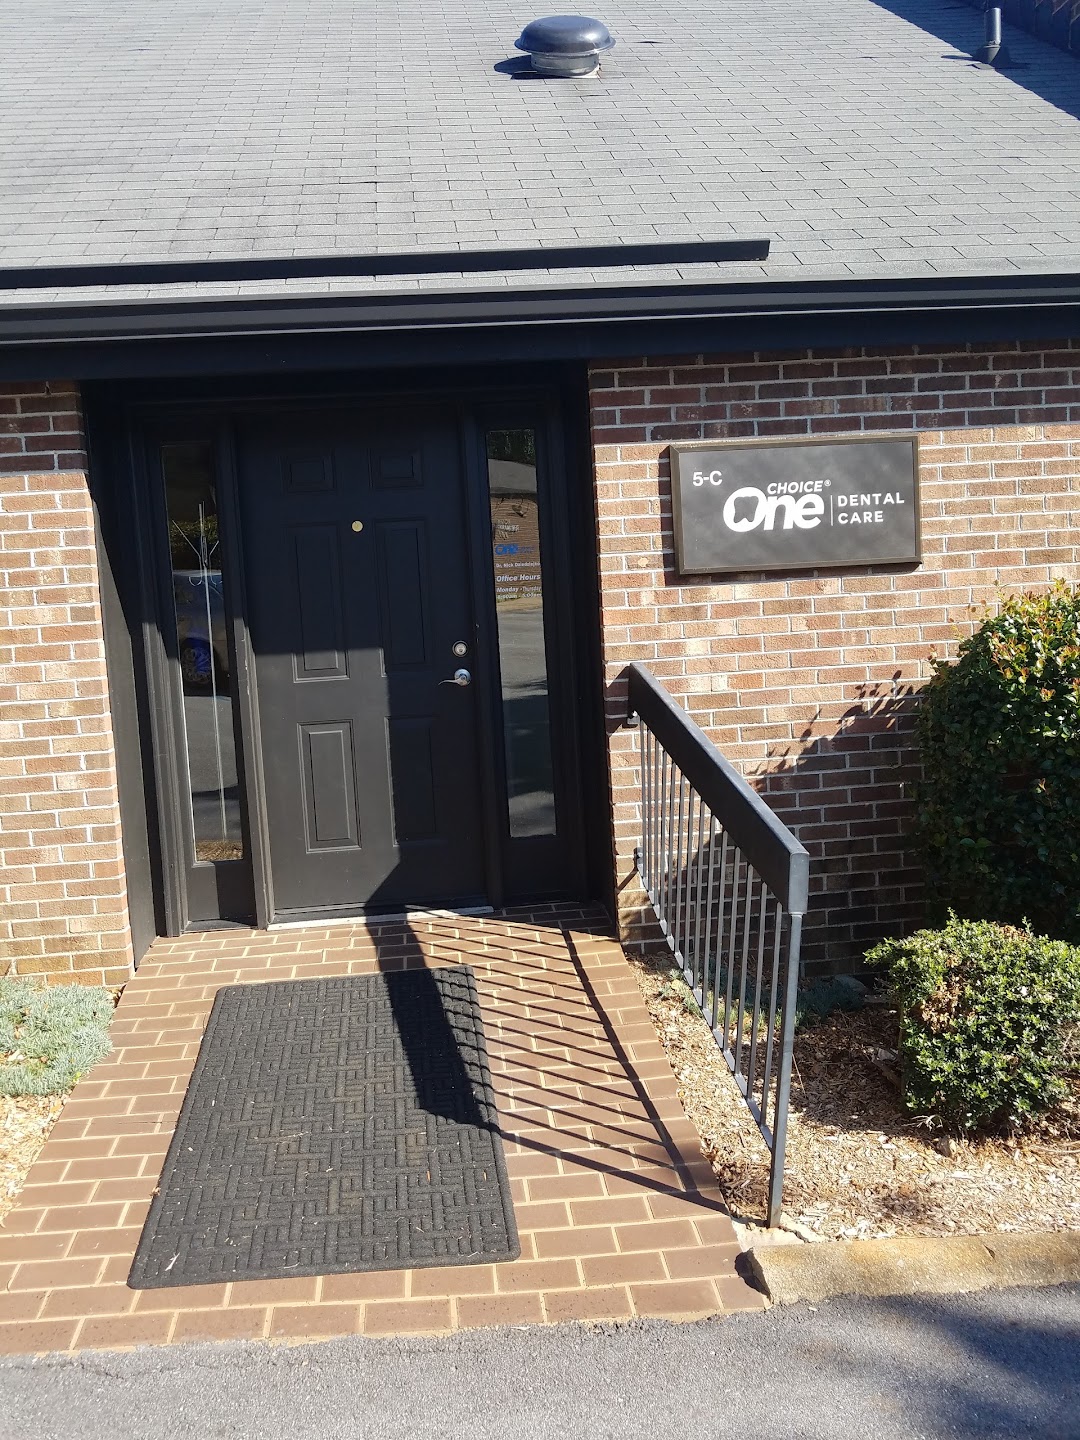 Choice One Dental Care of Greenville